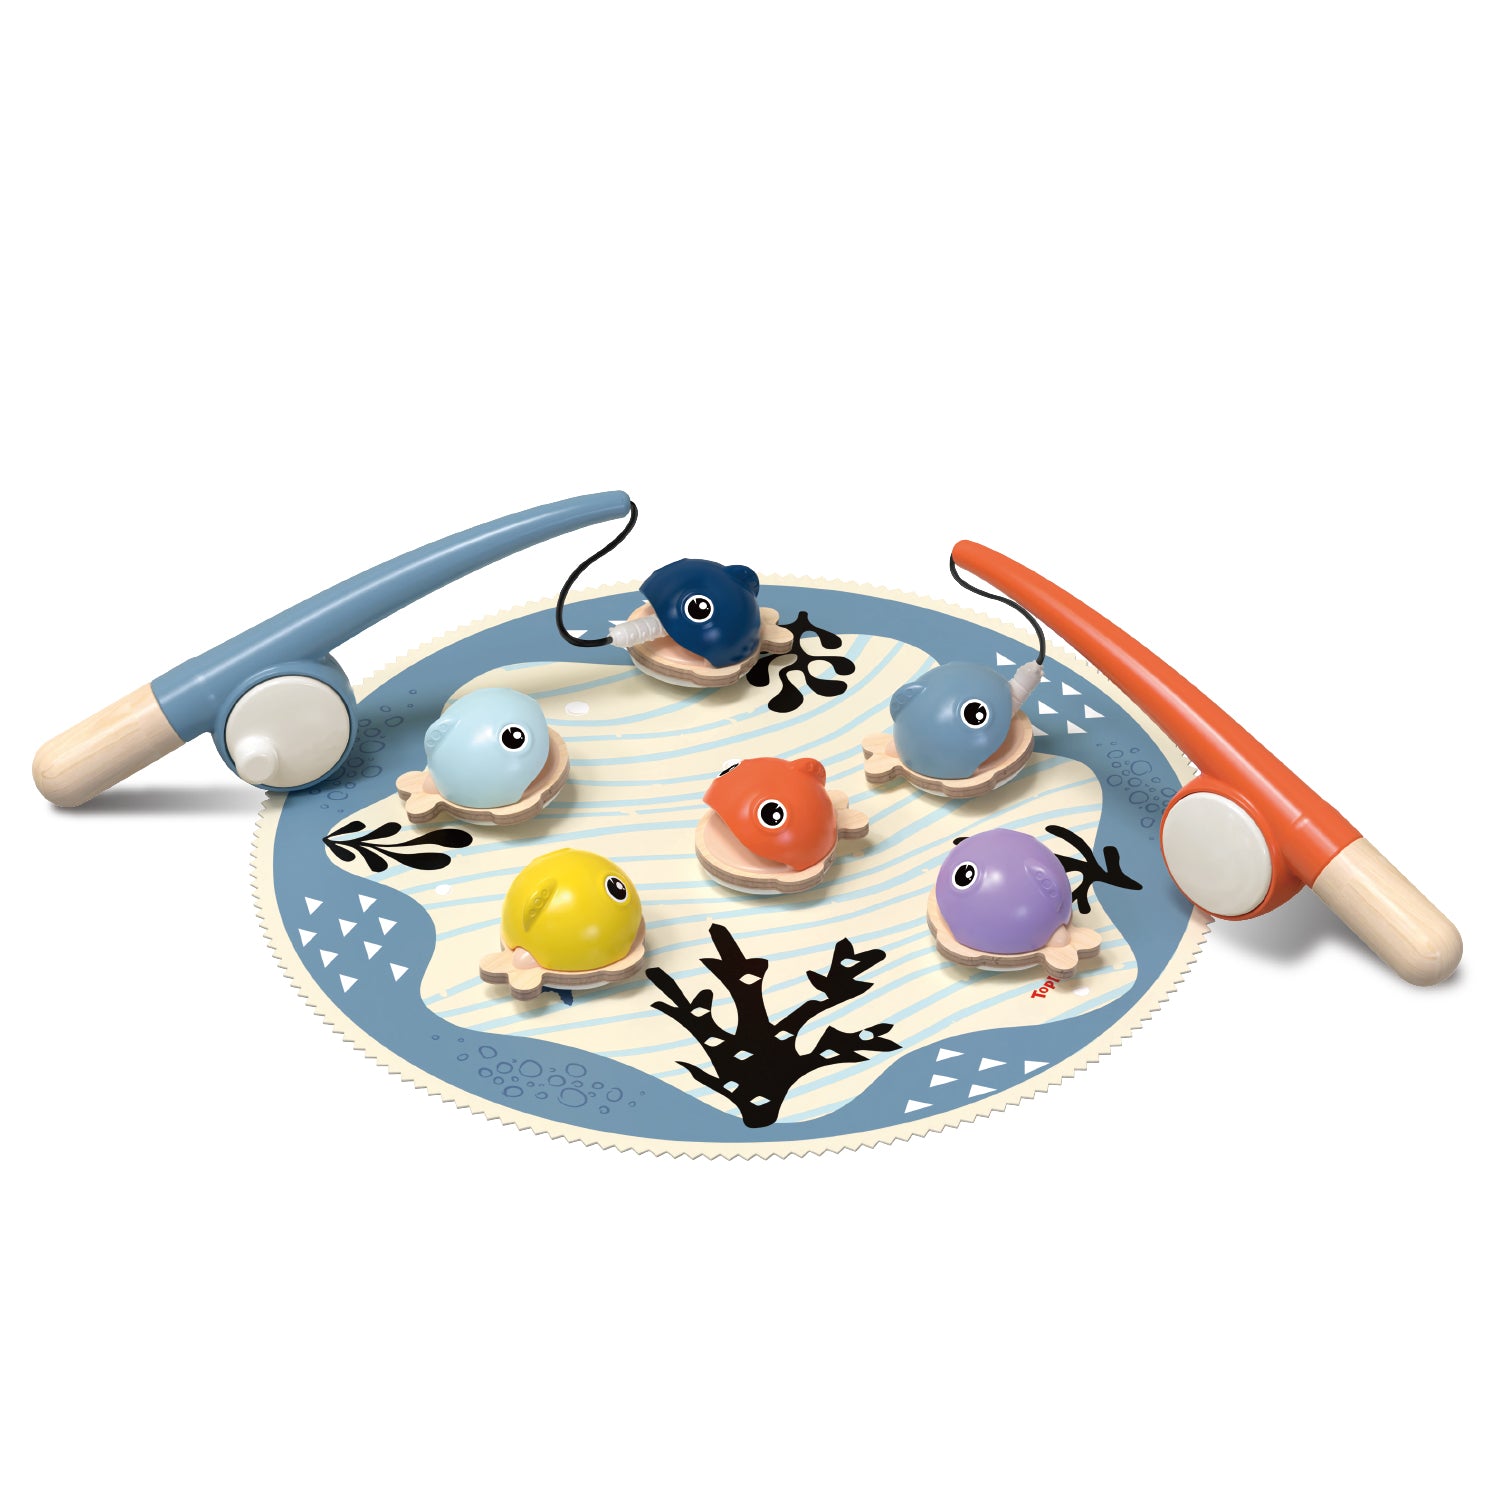 Topbright Fish Catching Game - Montessori toy 2 years


Let's go fishing!
TOPBRIGHT collection has rethought the popular classic game: the six magnetic fish are three-dimensional and realistically designed. Together with parents, friends, or alone, children go fishing. Who can land the most fish? A motor skills toy for children aged 2 and over that will delight!


Innovative game fish that bite
The fish's mouth is wide open when it swims, but when it bites, the fish's mouth closes around the fishing line, just like in real life when it is pulled out.


Realistic fishing rods
Just like a real fishing rod, the two wooden rods have a crank to reel in the fishing line. Once a fish has bitten, children turn the crank to reel in their catch. Thanks to the realistic bite, the toy will delight boys and girls aged 2 years and over for a long time.


Ideal for on the go
Thanks to the soft mat as a playing surface, the magnetic game for ages two years and up can be packed up in no time at all and doesn't take up much space. Young fishers easily take the fishing game to friends or grandparents and fish with them.


A great motor skills toy gift for girls and boys aged 2 years and up.


Safe material
We only use the best materials for our magnetic fishing game 